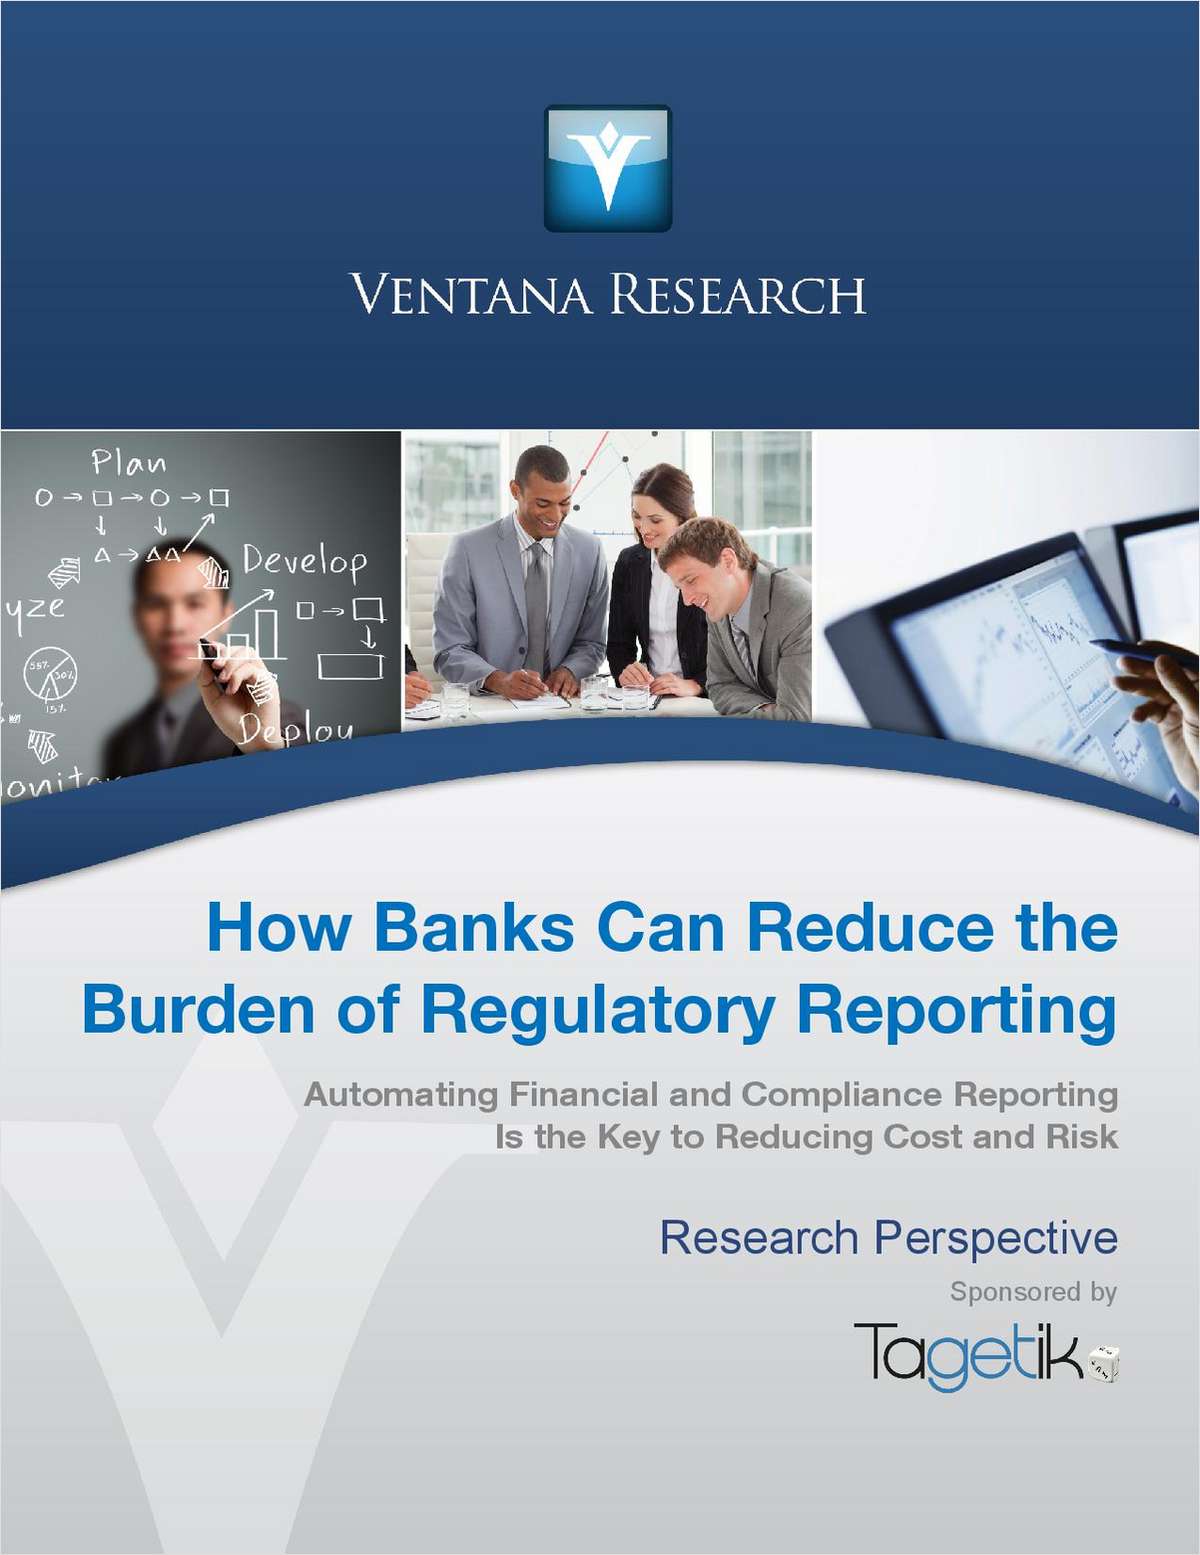 How Banks Can Reduce the Burden of Regulatory Reporting